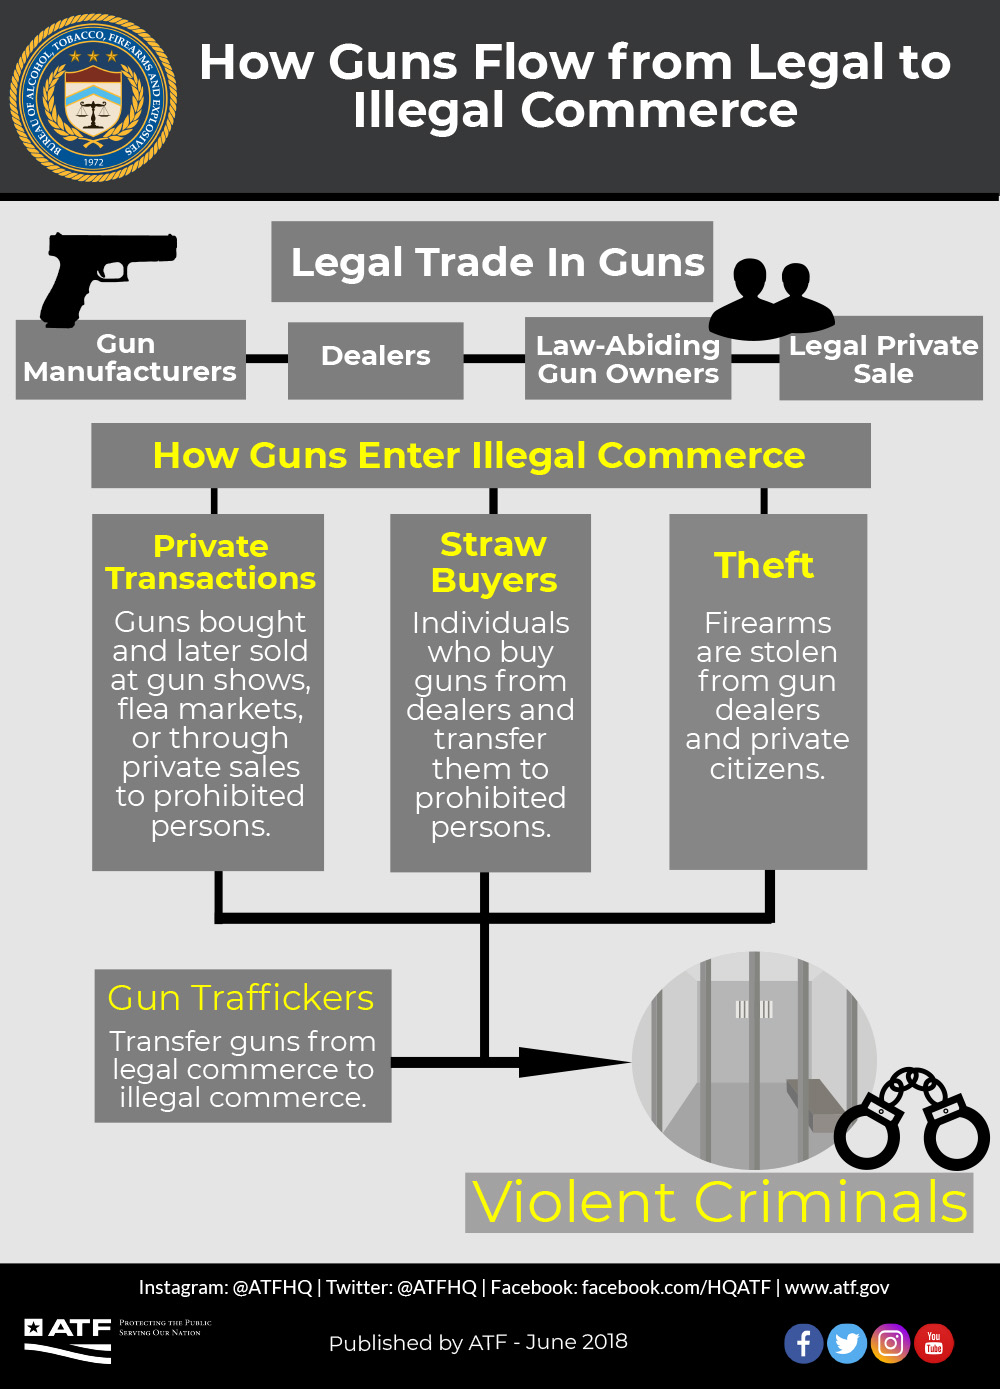 How Guns Flow from Legal to Illegal Commerce